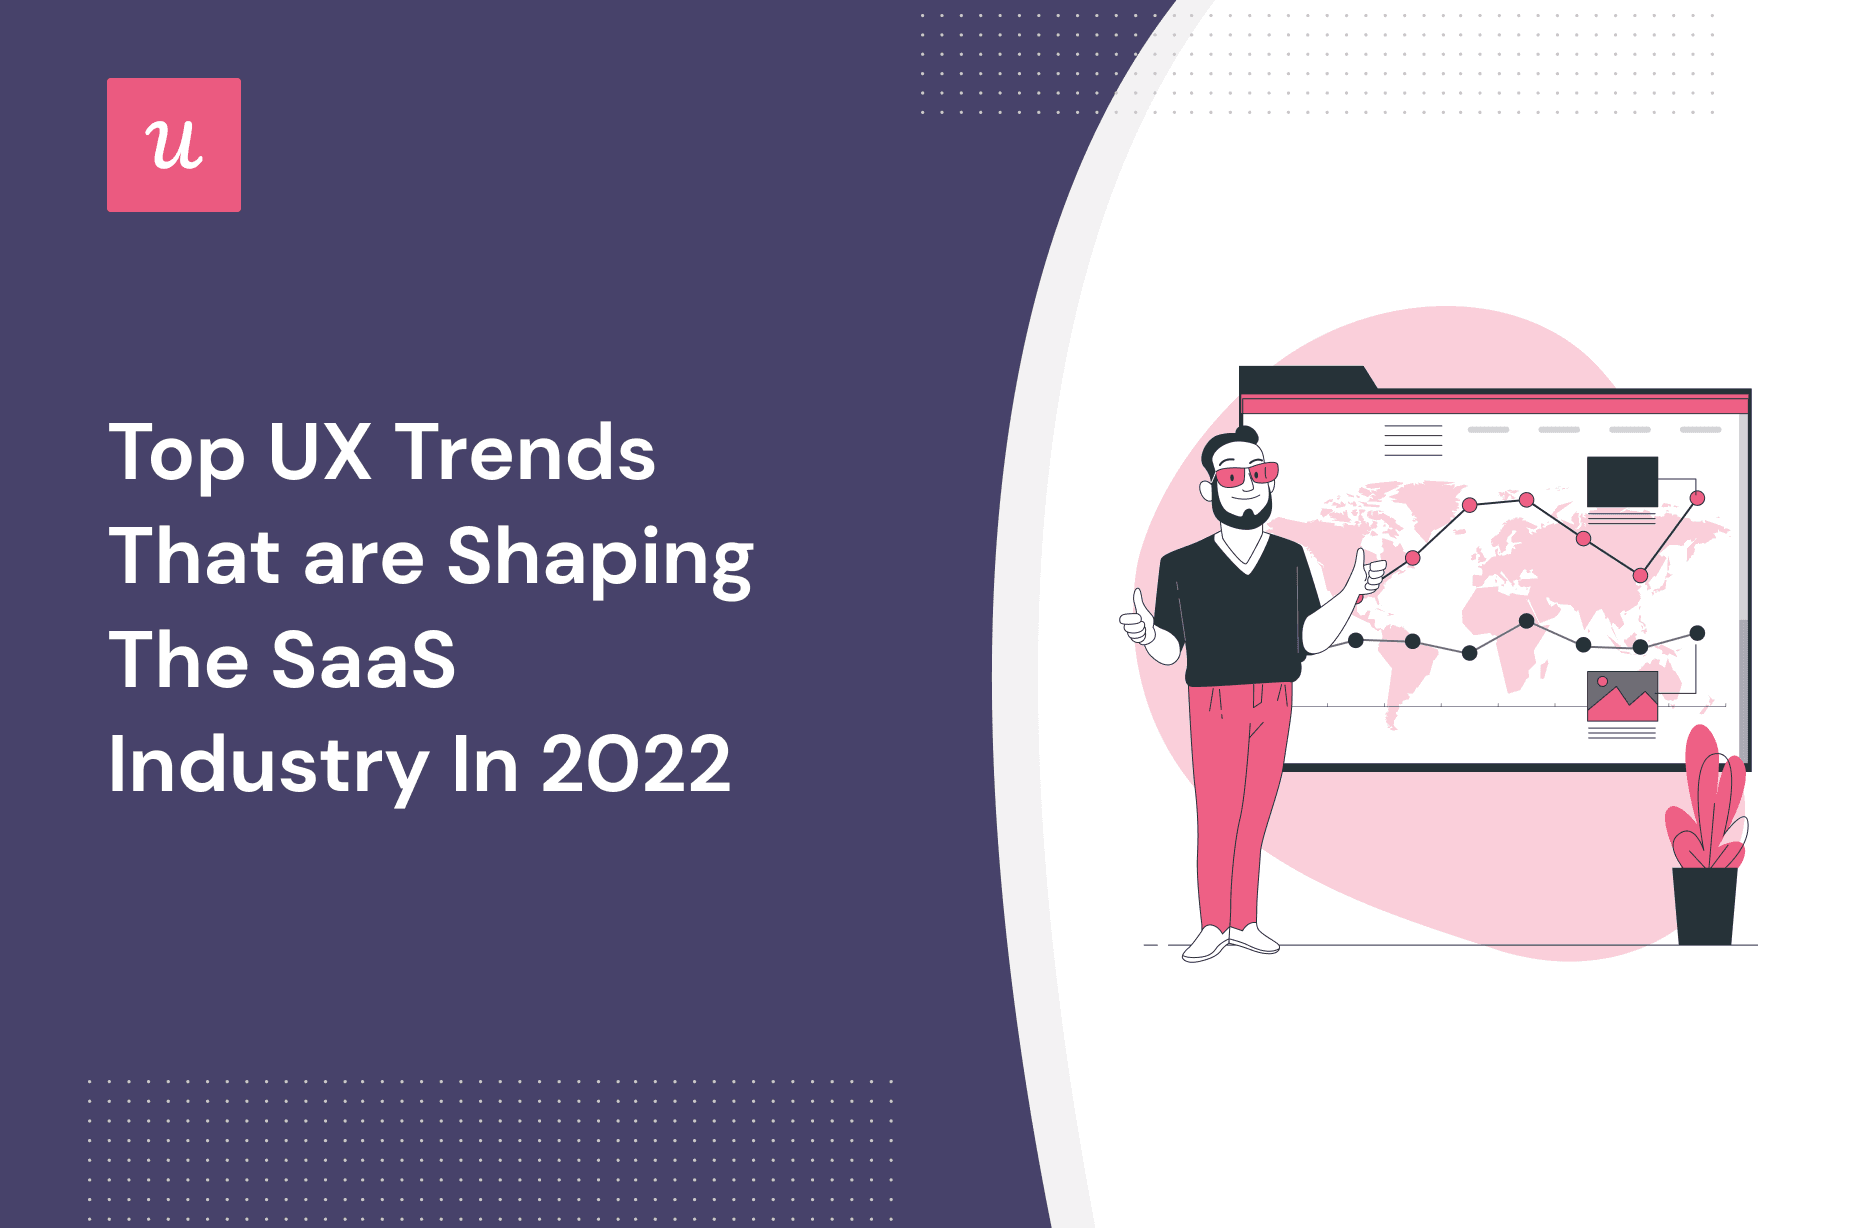 Top UX Trends That Are Shaping The SaaS Industry in 2022 cover